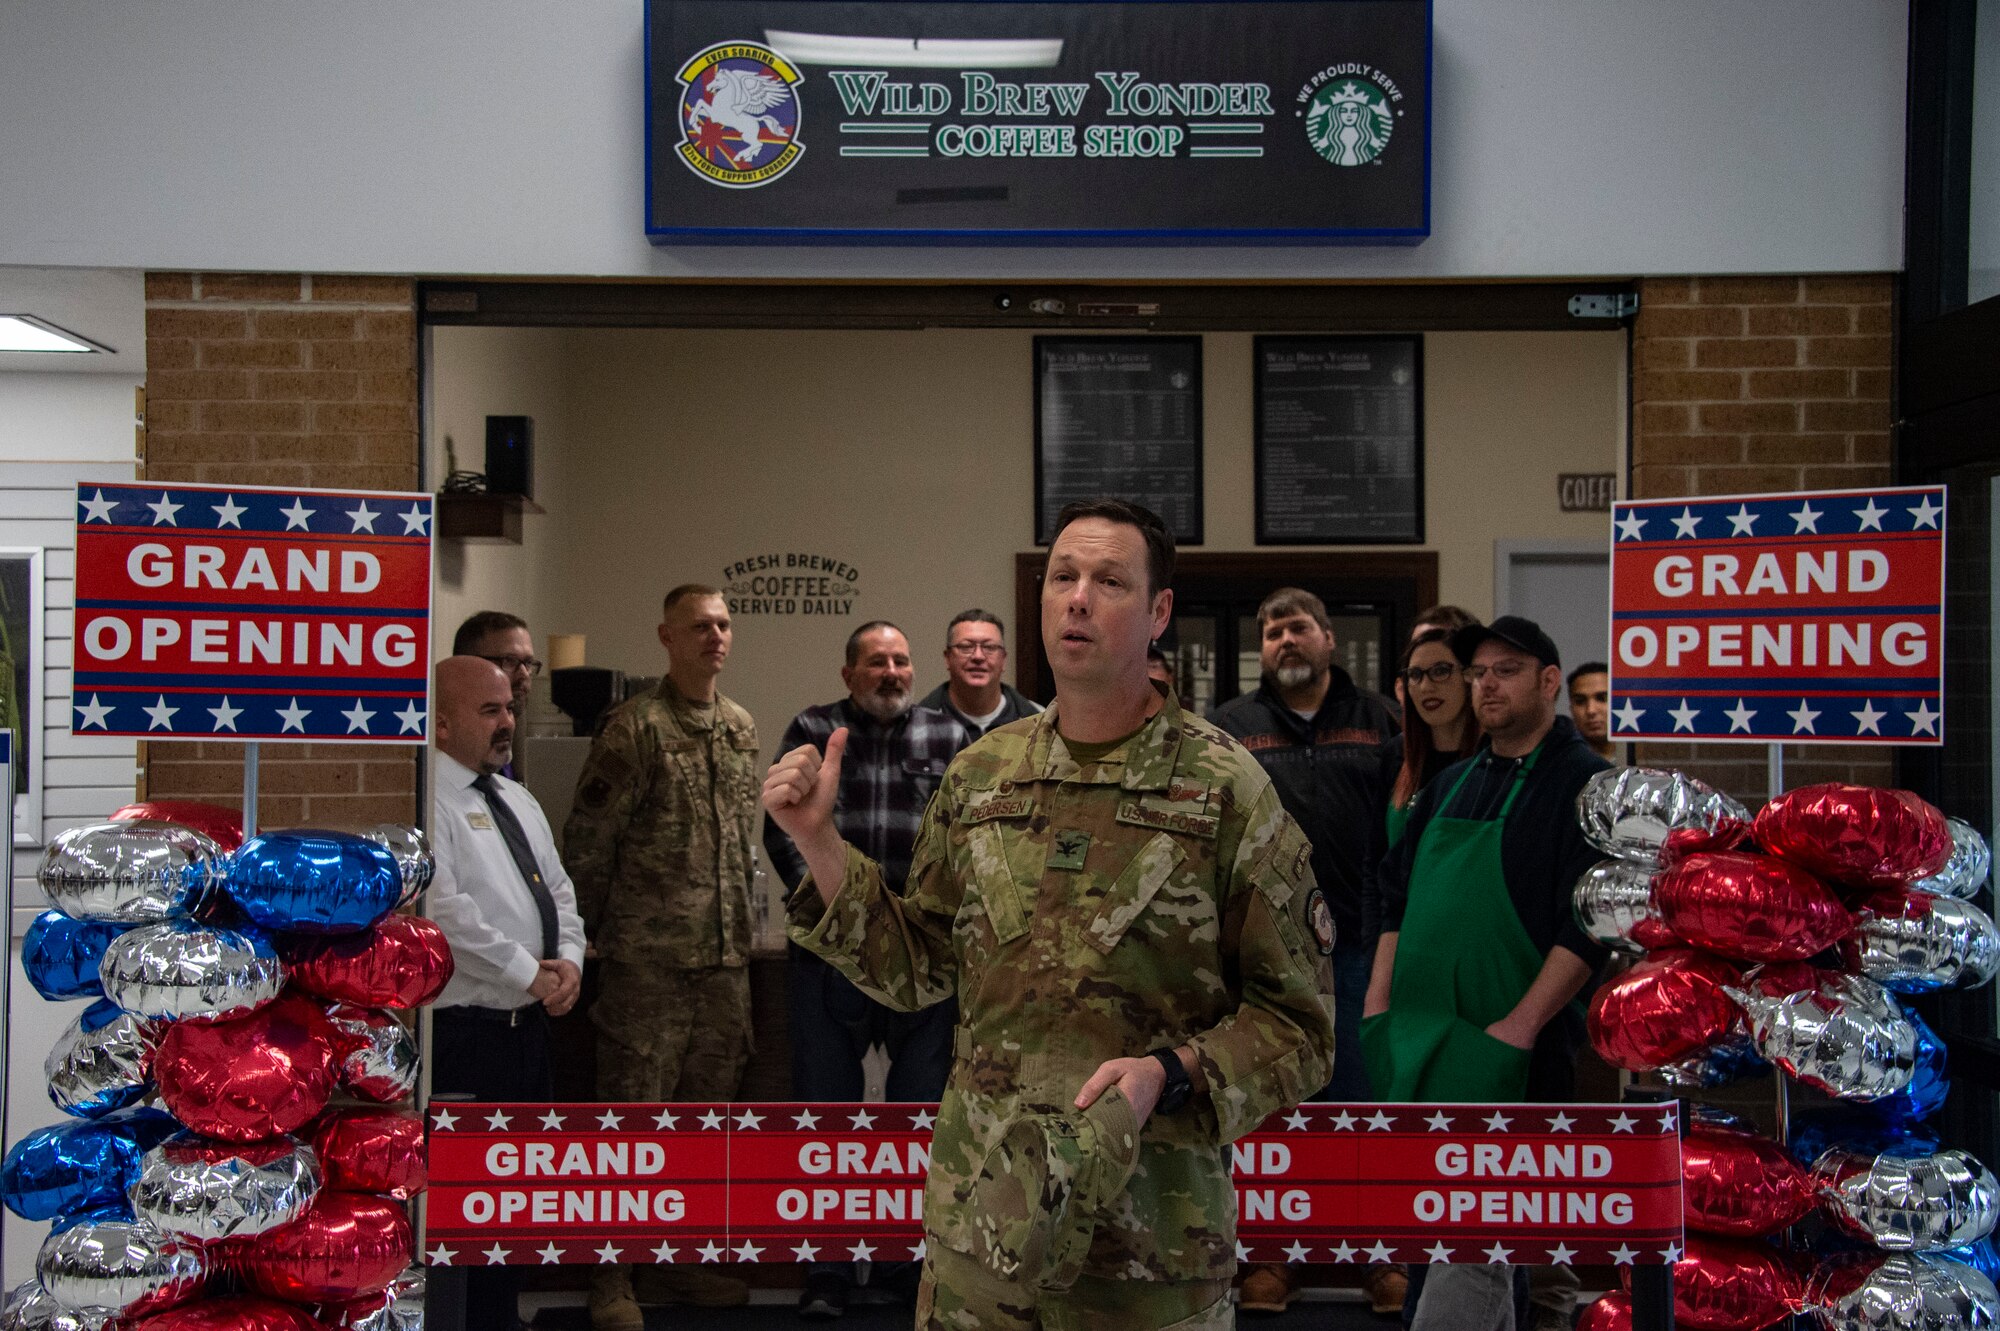 U.S. Air Force Col. Robert Pedersen, 97th Mission Support Group commander, talks about the efforts taken to open the new Wild Brew Yonder coffee shop, Feb. 29, 2019 at Altus Air Force Base, Okla